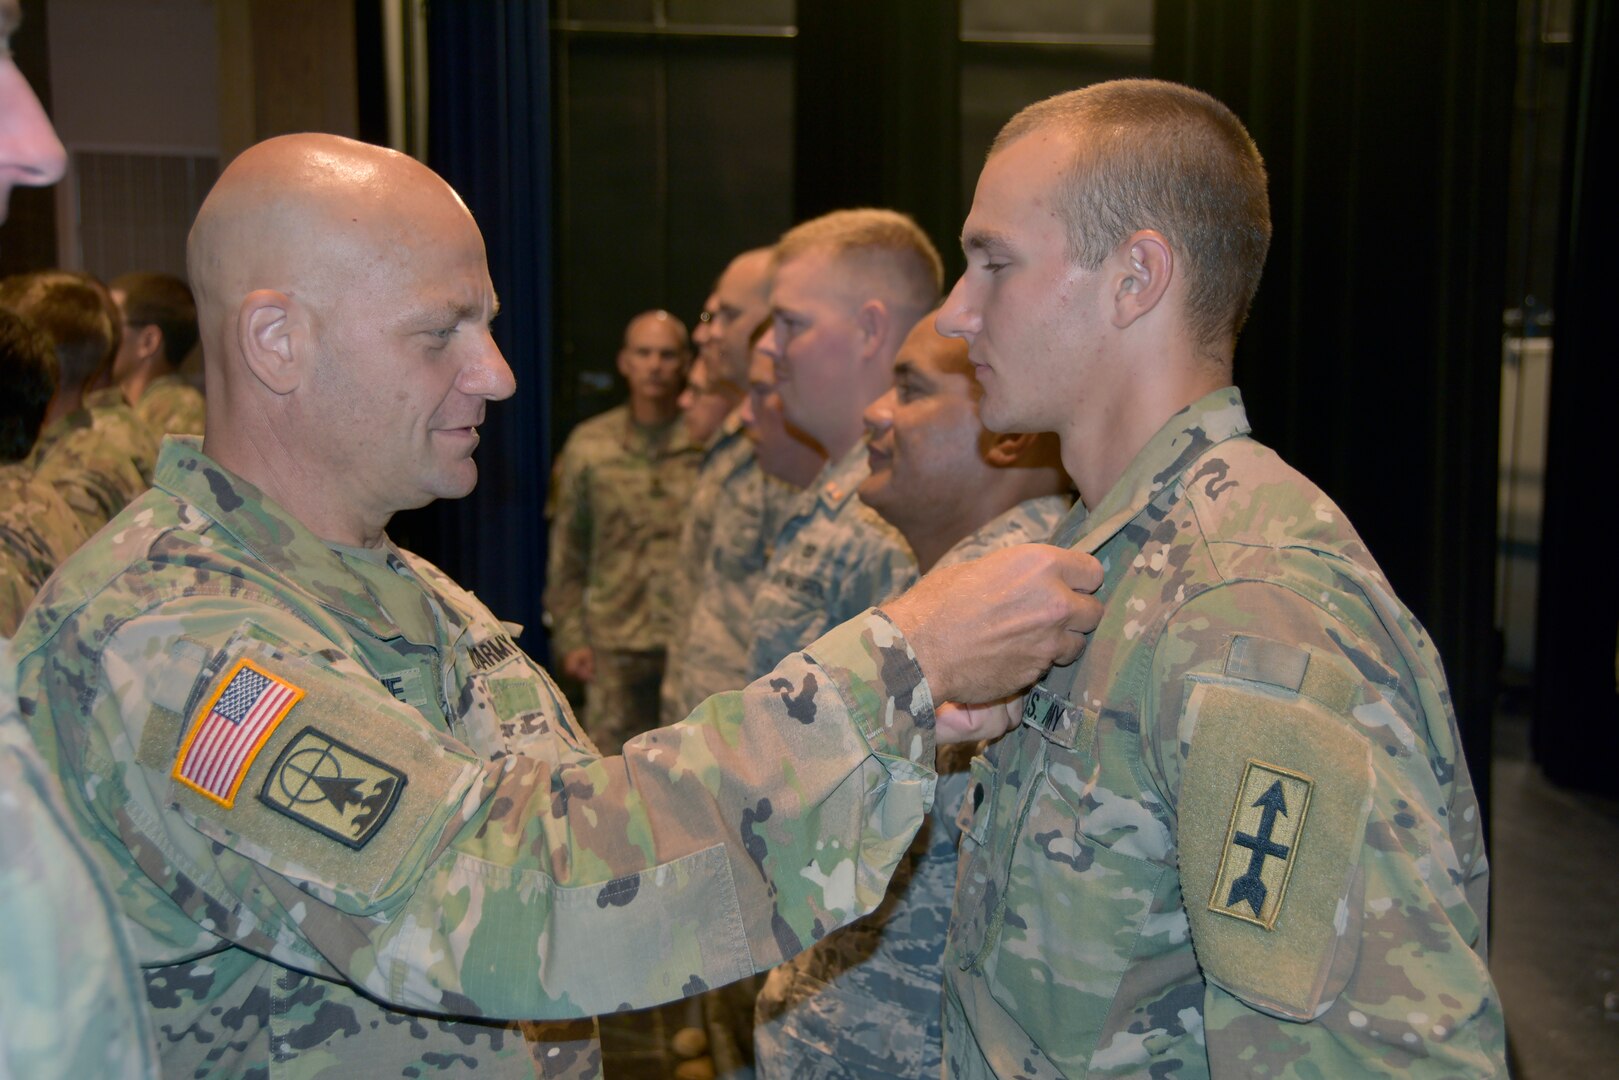 Brig. Gen. David Odonahue, Wisconsin's deputy adjutant general for civil support, pins the Wisconsin National Guard Emergency Service Ribbon on the collars of approximately 150 Wisconsin National Guard Soldiers and Airmen during an Aug. 10, 2019, ceremony at Unity High School in Balsom Lake, Wis. The Guard members helped clear storm debris from more than 50 miles of area roadways in the weeks following strong summer storms July 19.